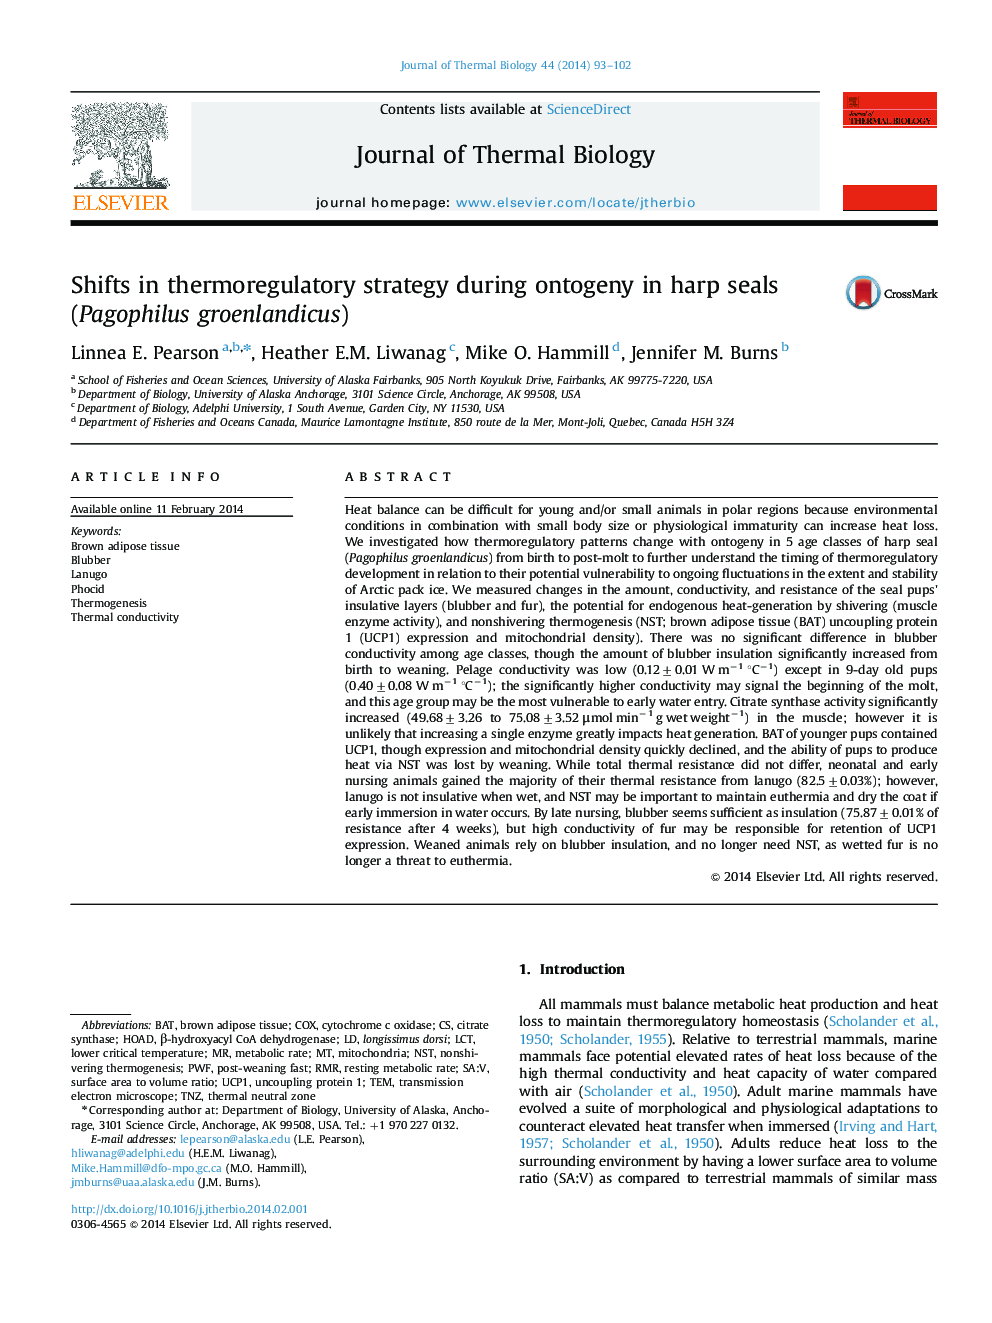 Shifts in thermoregulatory strategy during ontogeny in harp seals (Pagophilus groenlandicus)